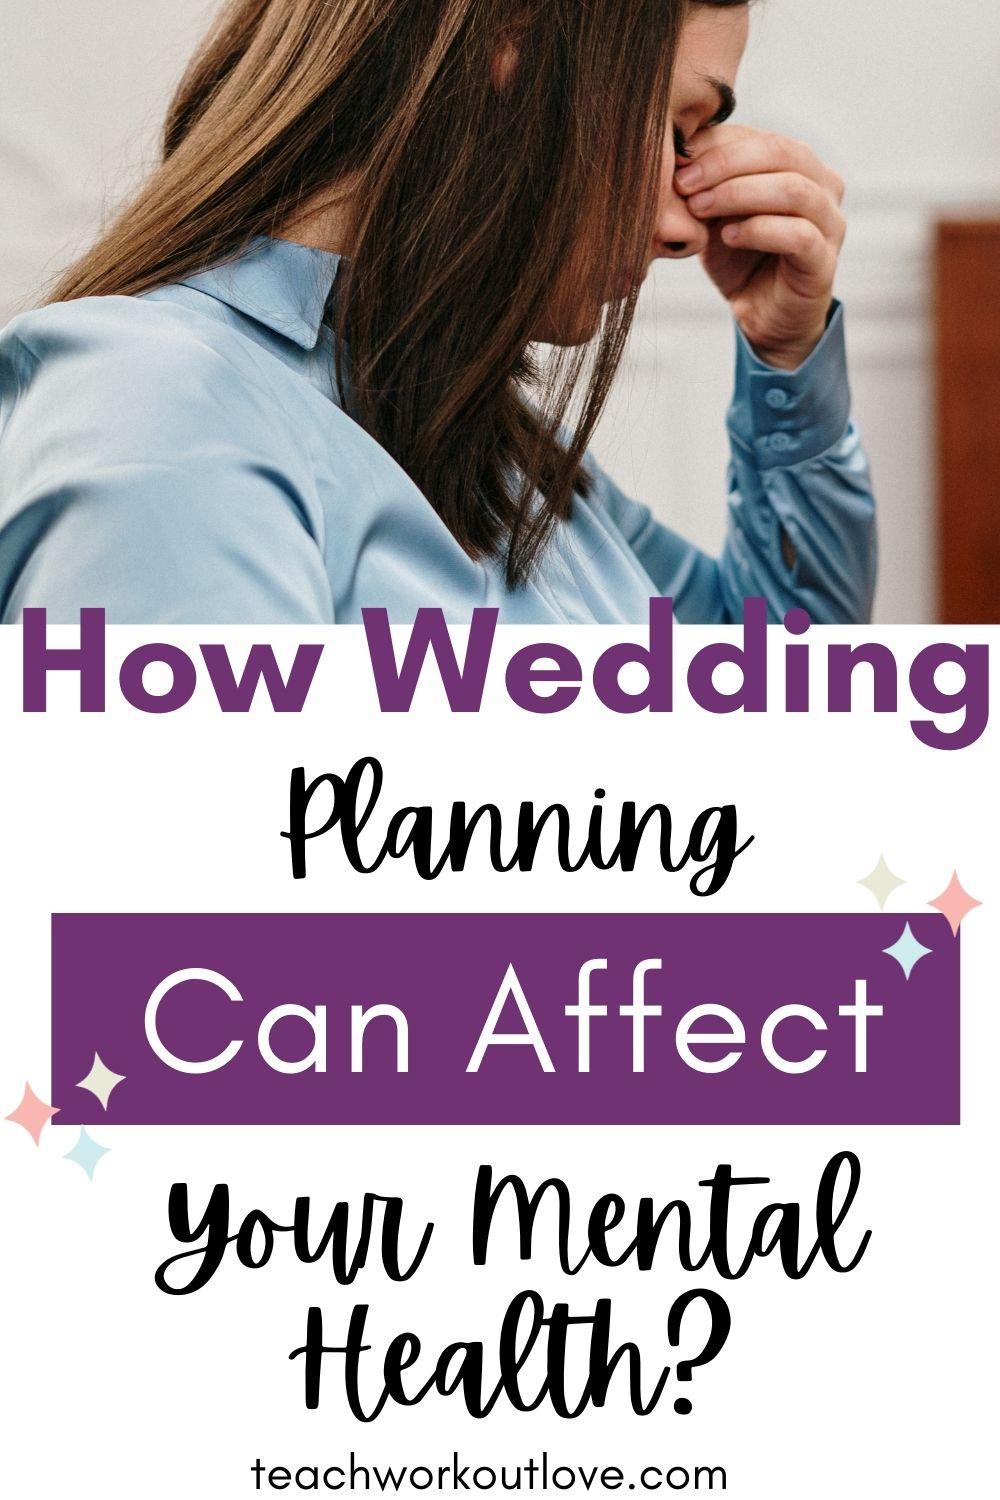 How Wedding Planning Can Affect Your Mental Health